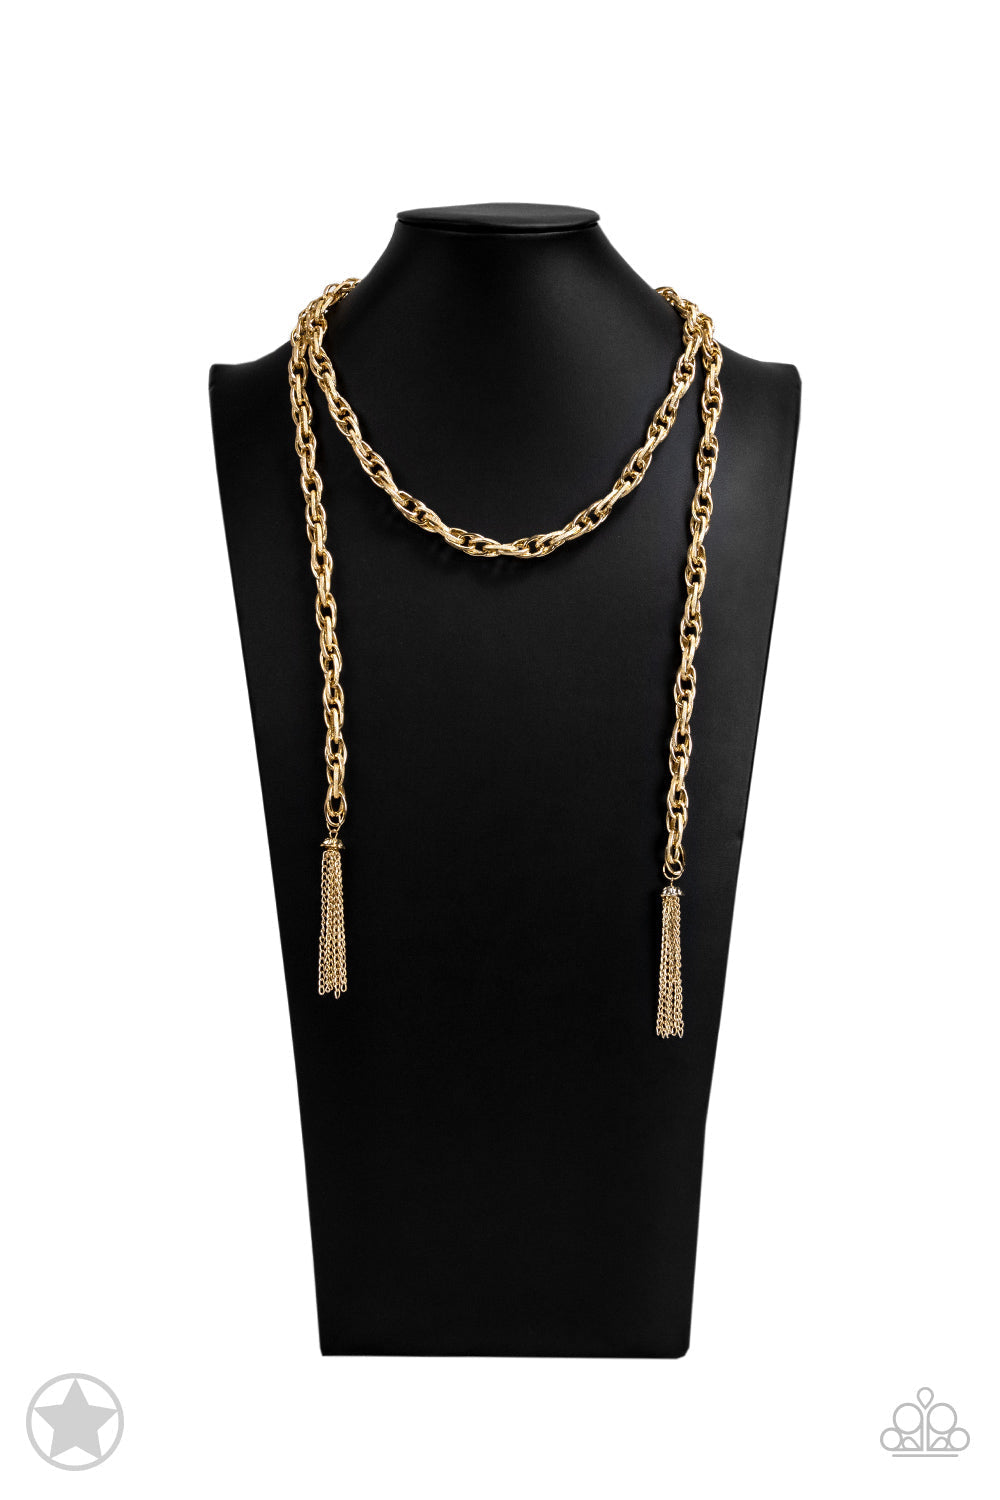 SCARFed for Attention - Gold Scarf Fashion Necklace - Paparazzi Accessories - A single strand of spiraling, interlocking links with light-catching texture is anchored by two tassels of chain that add dramatic length to the piece. Undeniably the most versatile piece in Paparazzi's history, the scarf necklace features FIVE different ways to accessorize: Open Layer, Loop, Traditional Wrap, Double Knot, and Nautical Knot. Sold as one individual necklace.